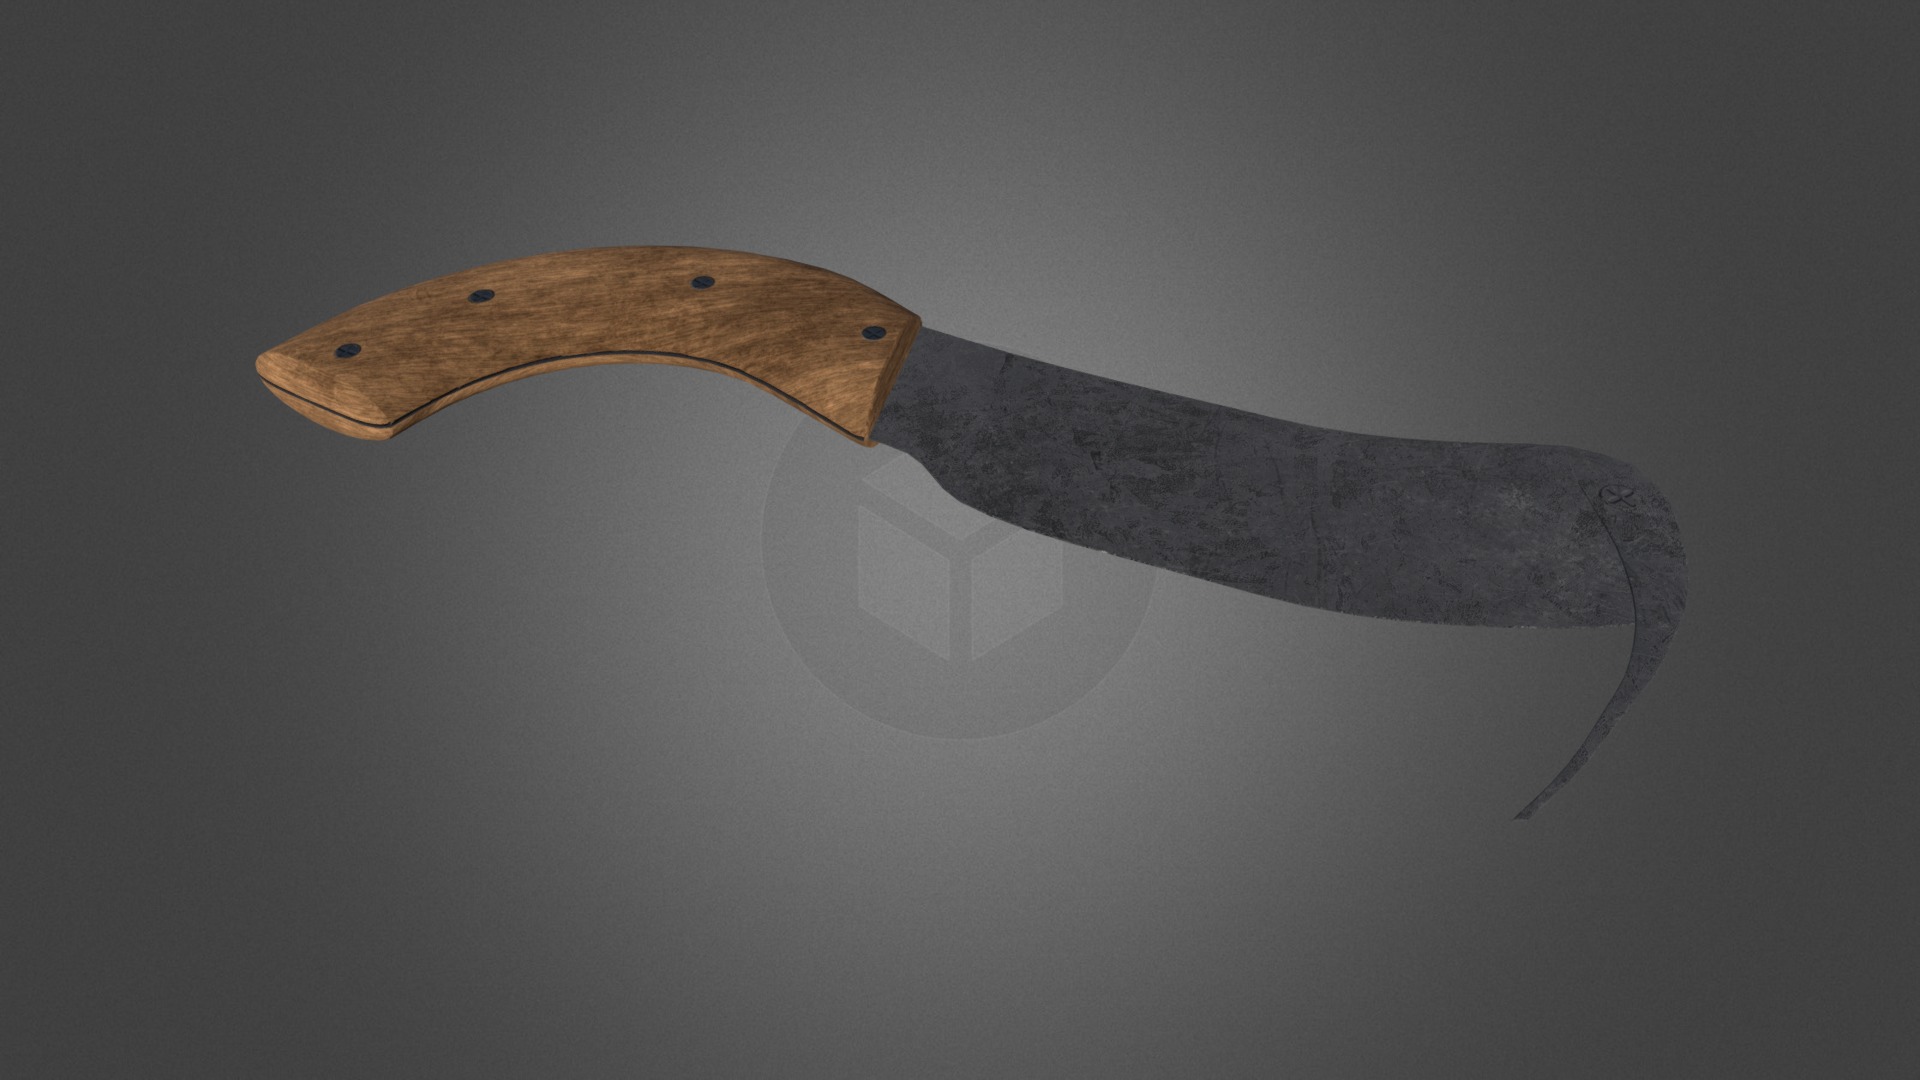 3D model Beet Hook Harvesting Tool - This is a 3D model of the Beet Hook Harvesting Tool. The 3D model is about a wooden knife with a handle.